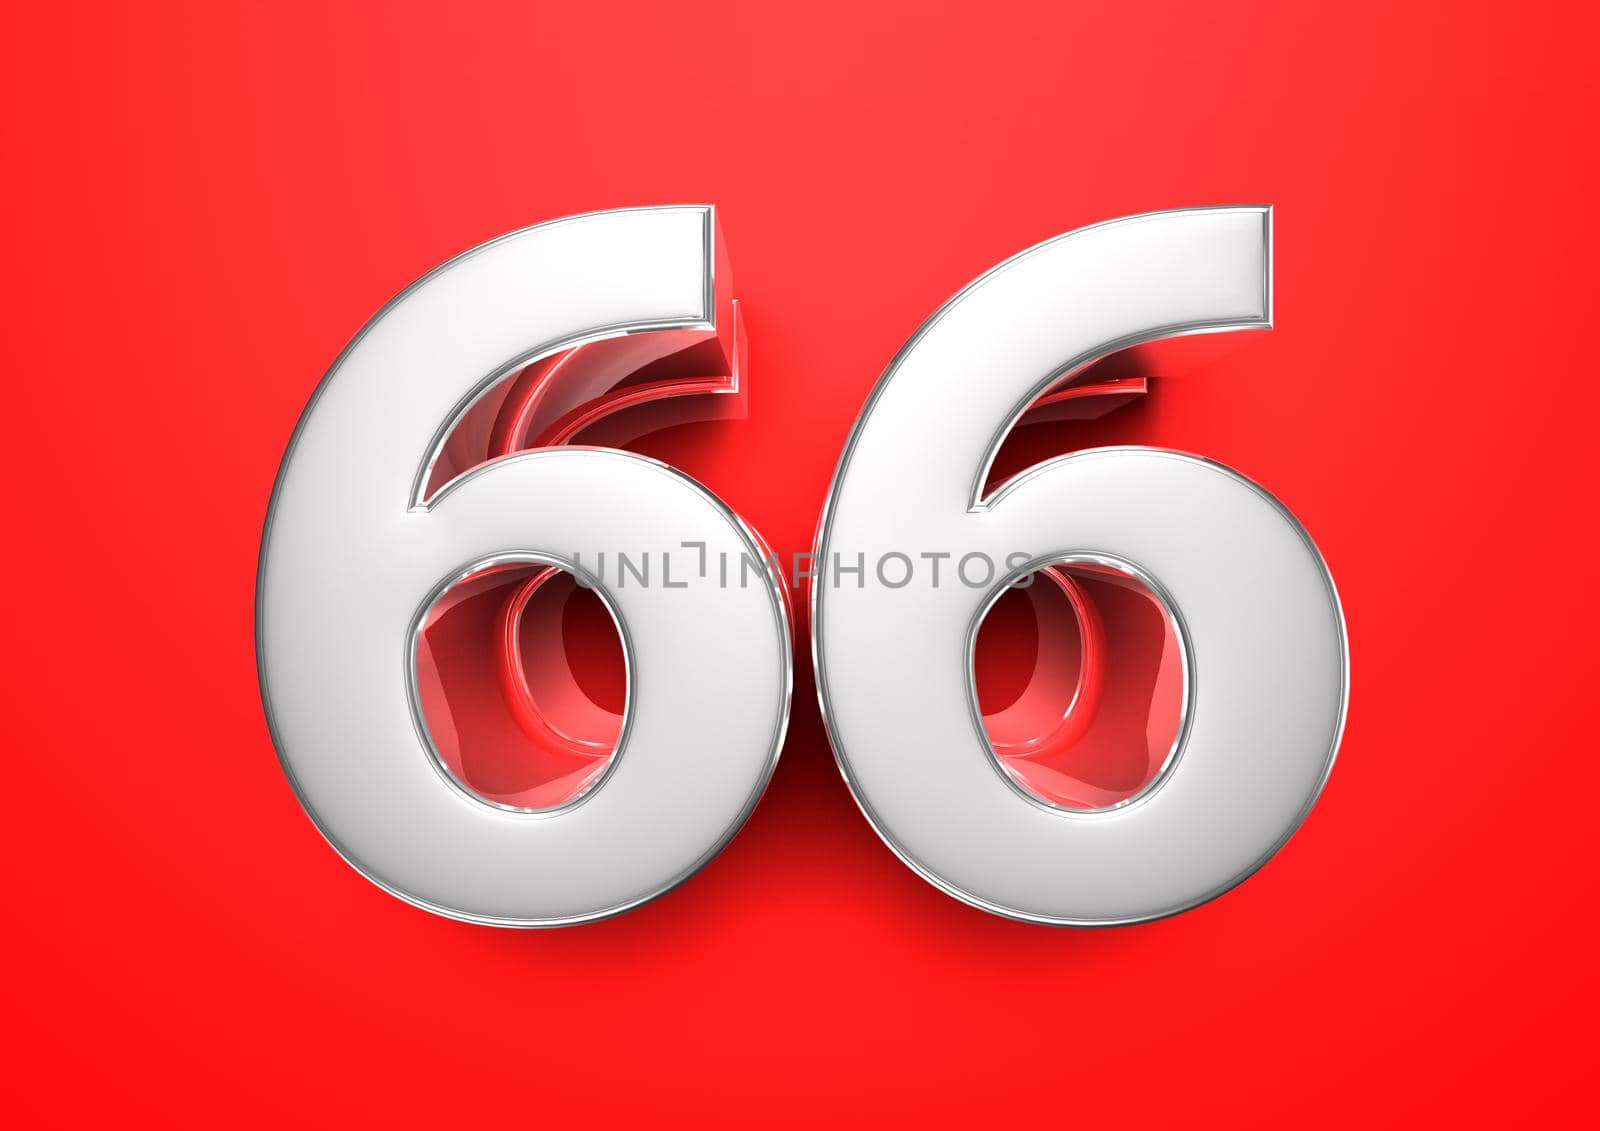 Price tag 66. Anniversary 66. Number 66 3D illustration on a red background.